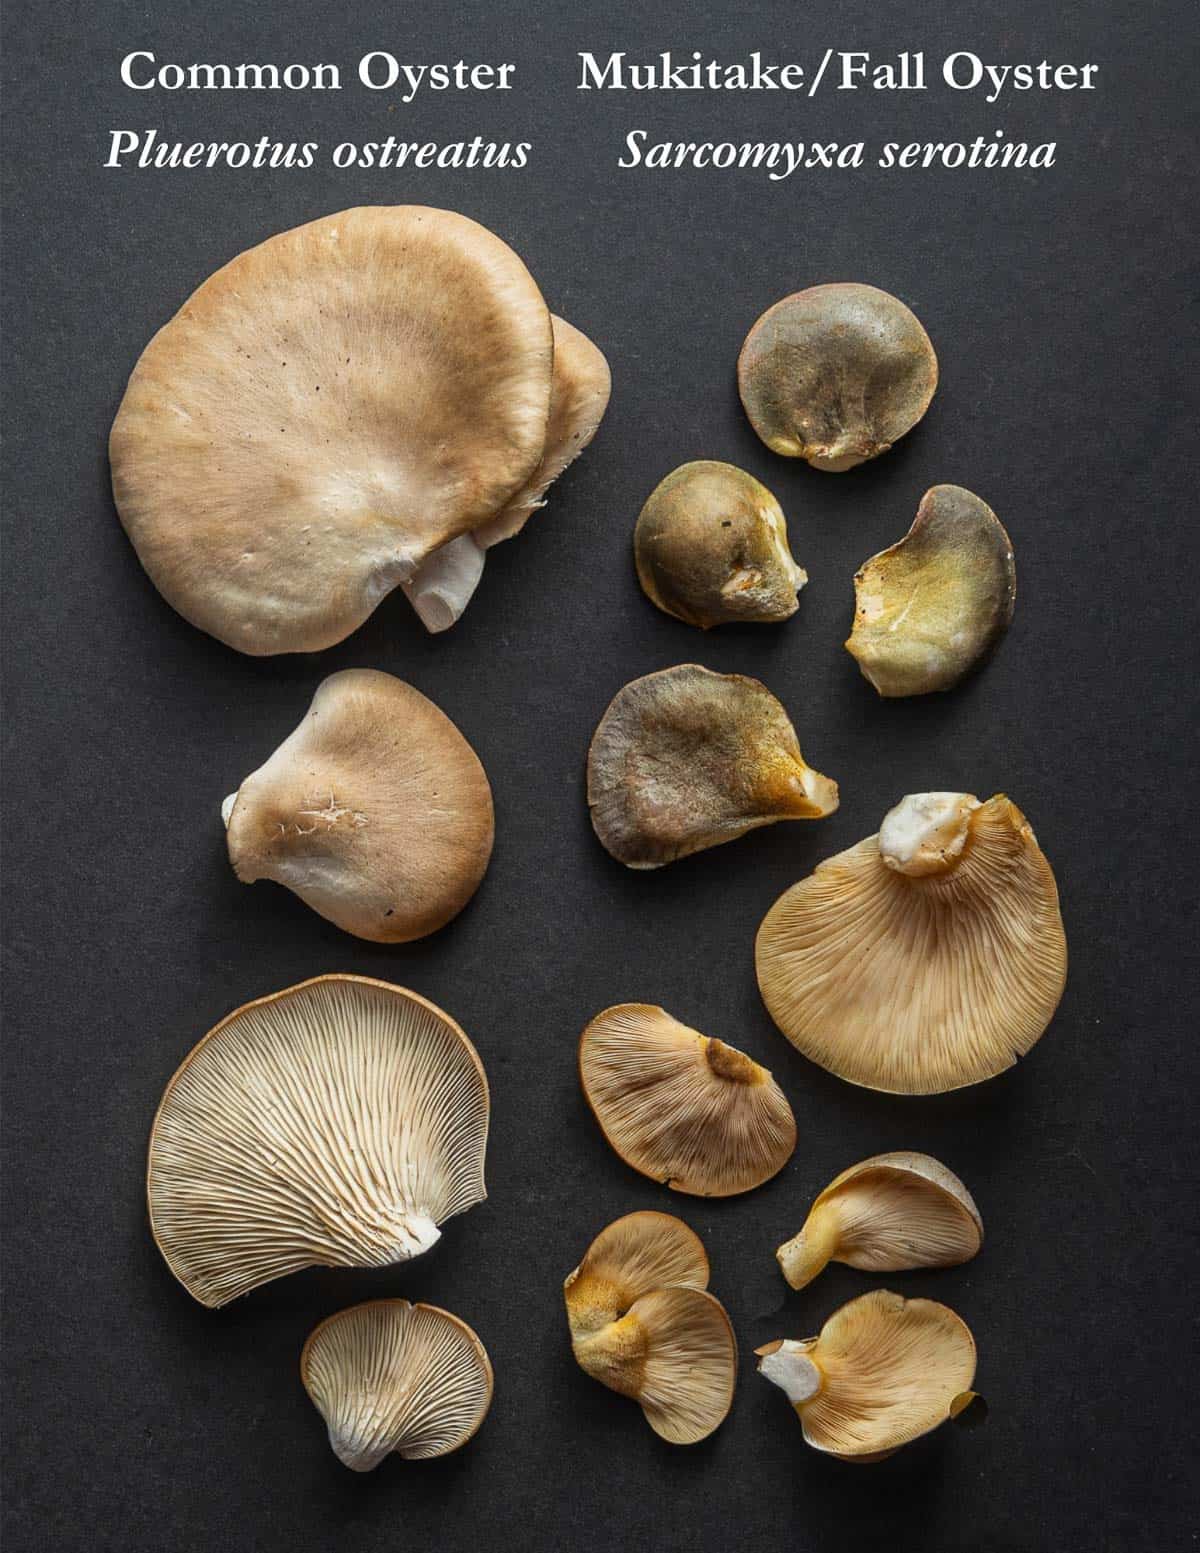 A comparison of oyster mushrooms vs fall oyster mushrooms for identification. 